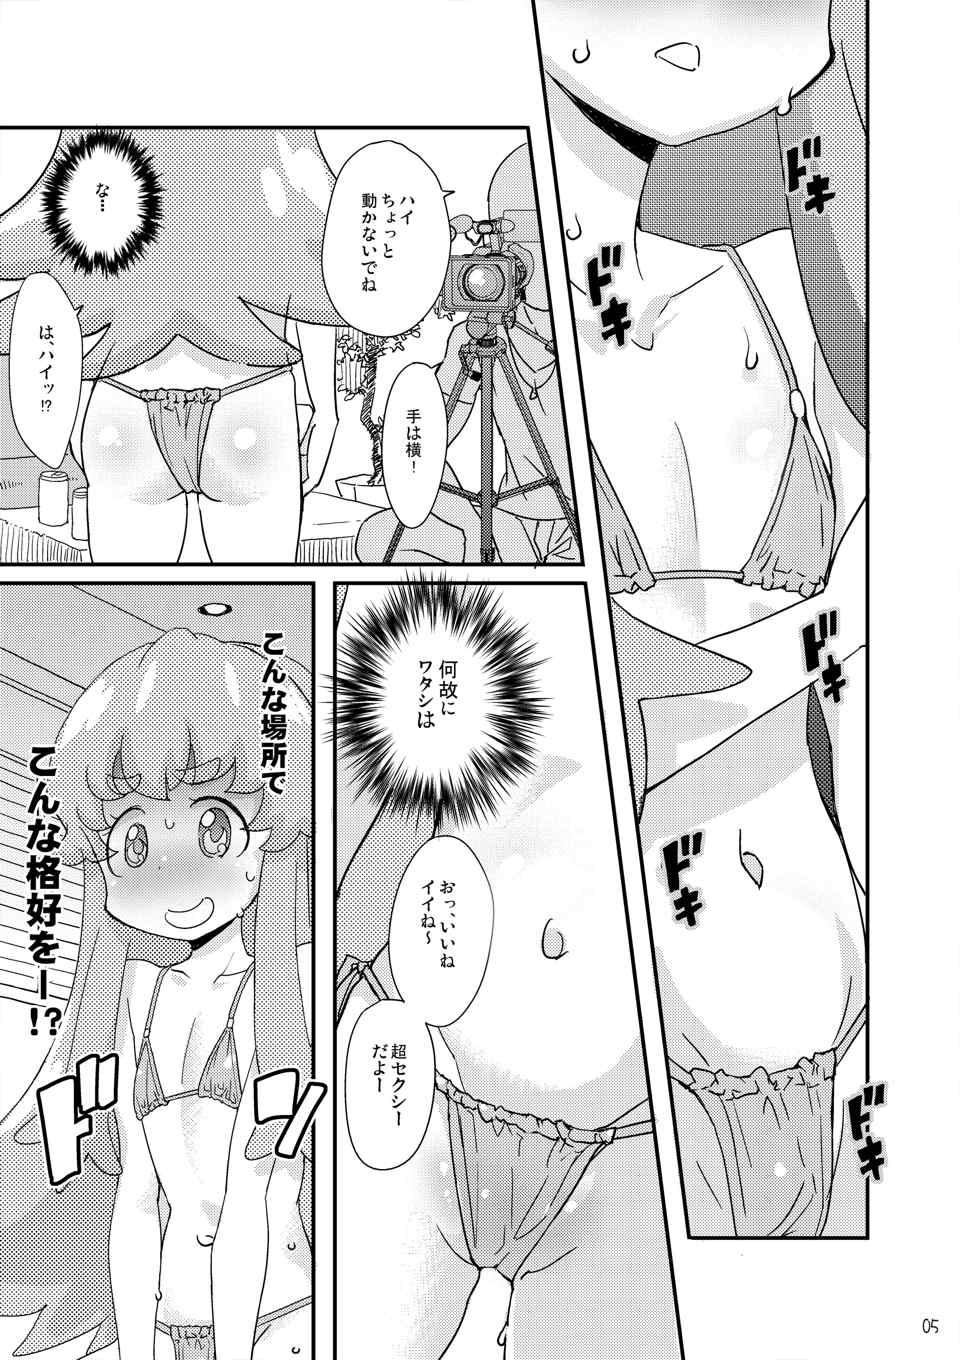 Ddf Porn HachaMecha Princess HiME-chan - Happinesscharge precure Gay Straight - Page 5